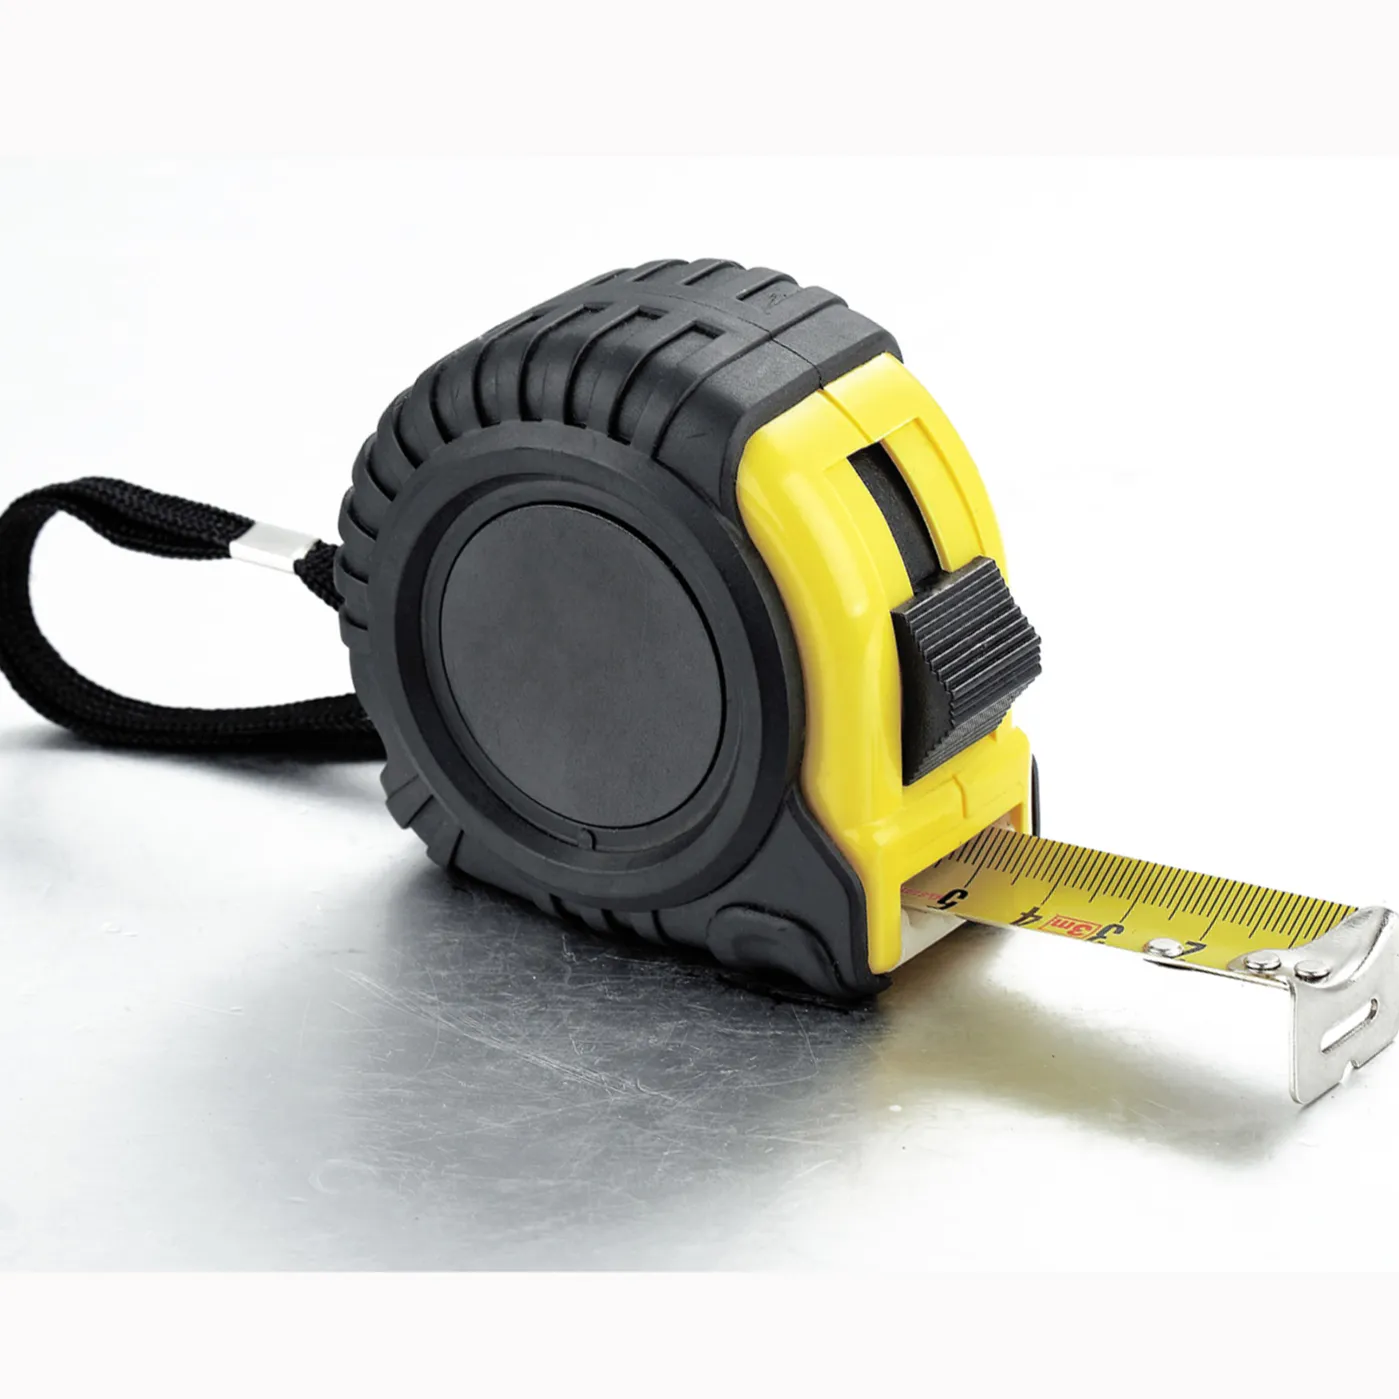 GreatWall Tape Measure Series 85 Rubber Jacket series